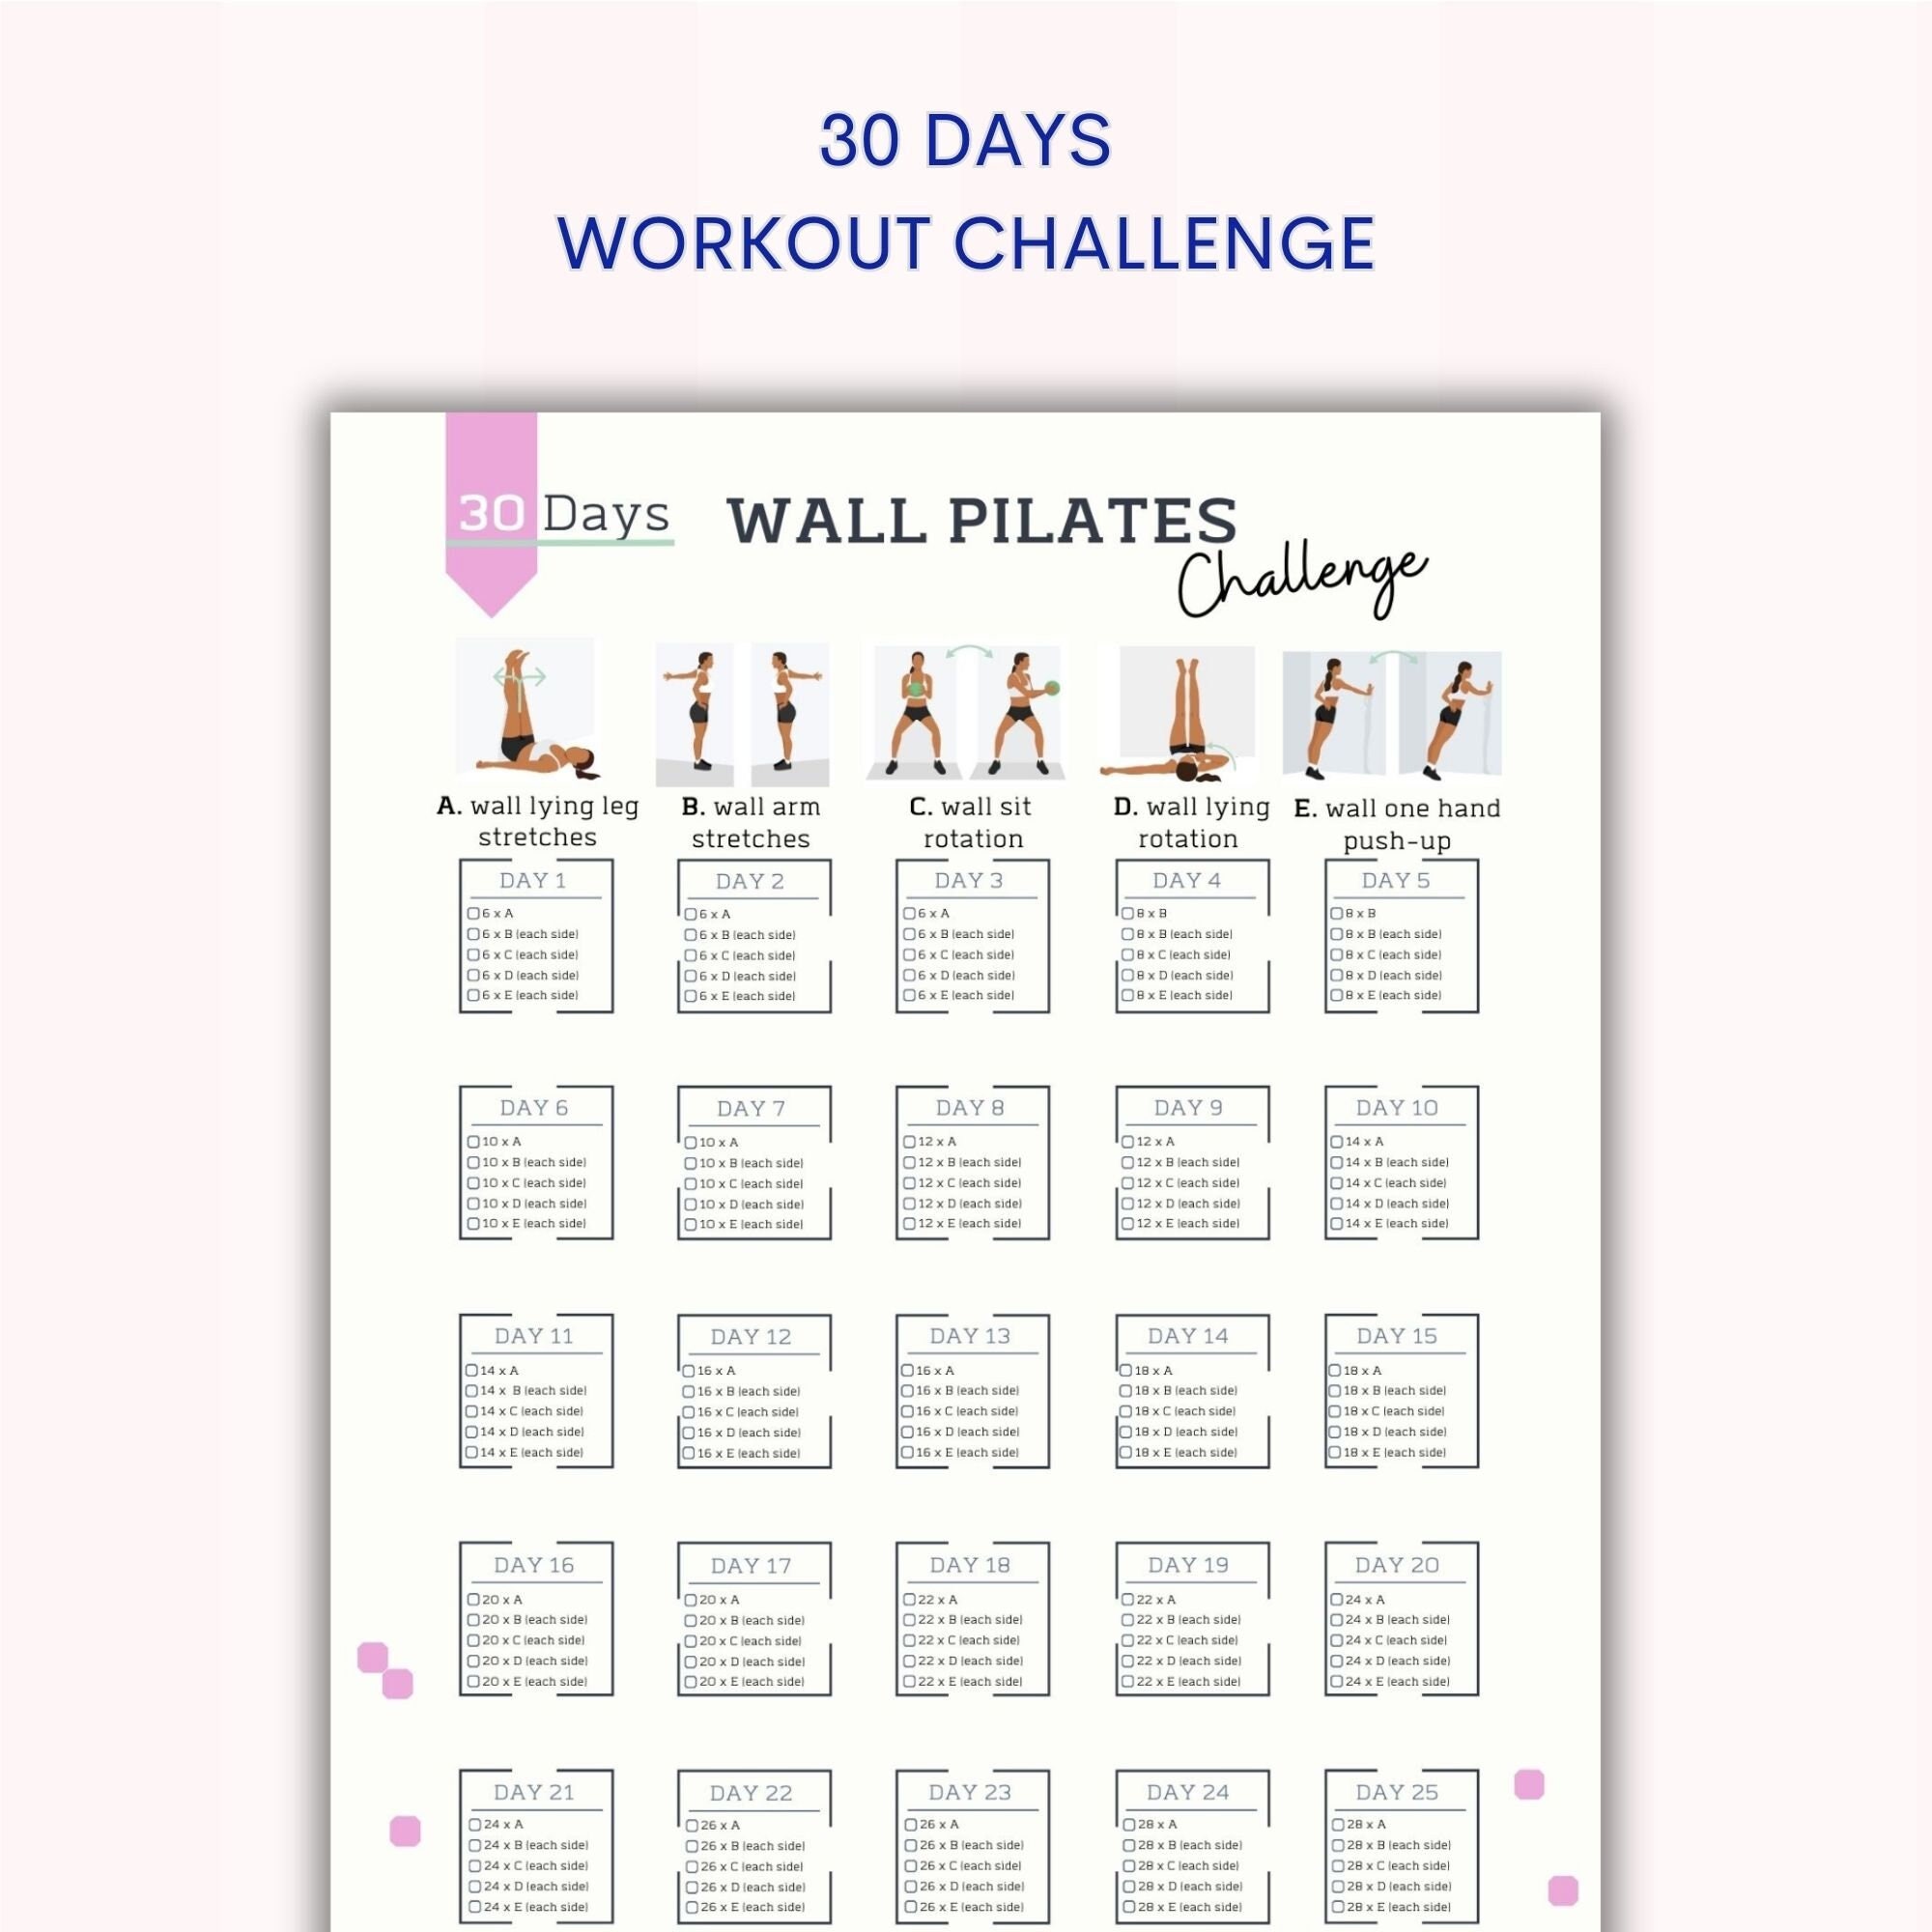 30 Day Wall Pilates Challenge Wall Pilates Workout Digital Quick ...